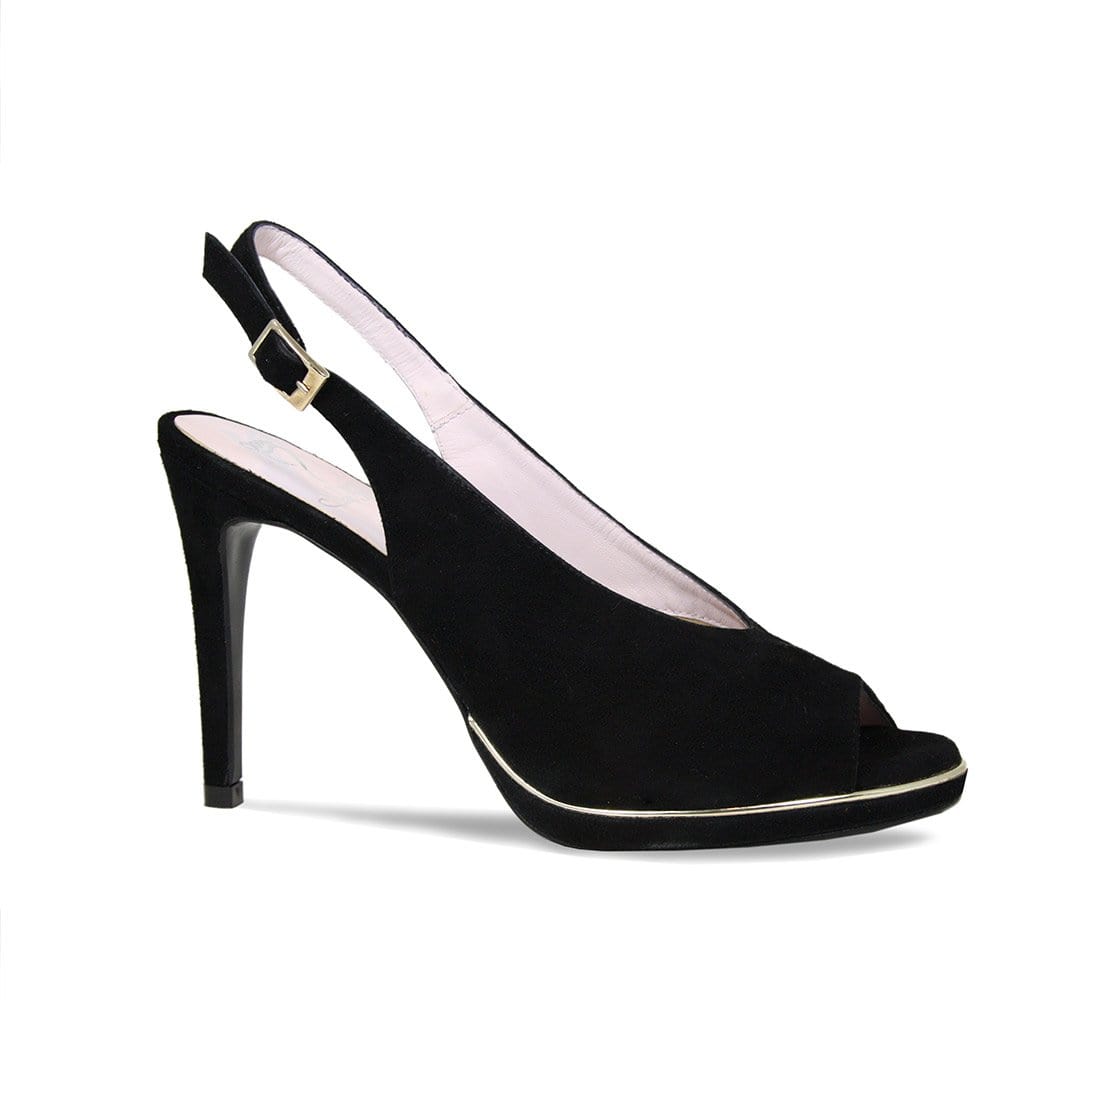 Barely There Strappy Occasion Heels Black